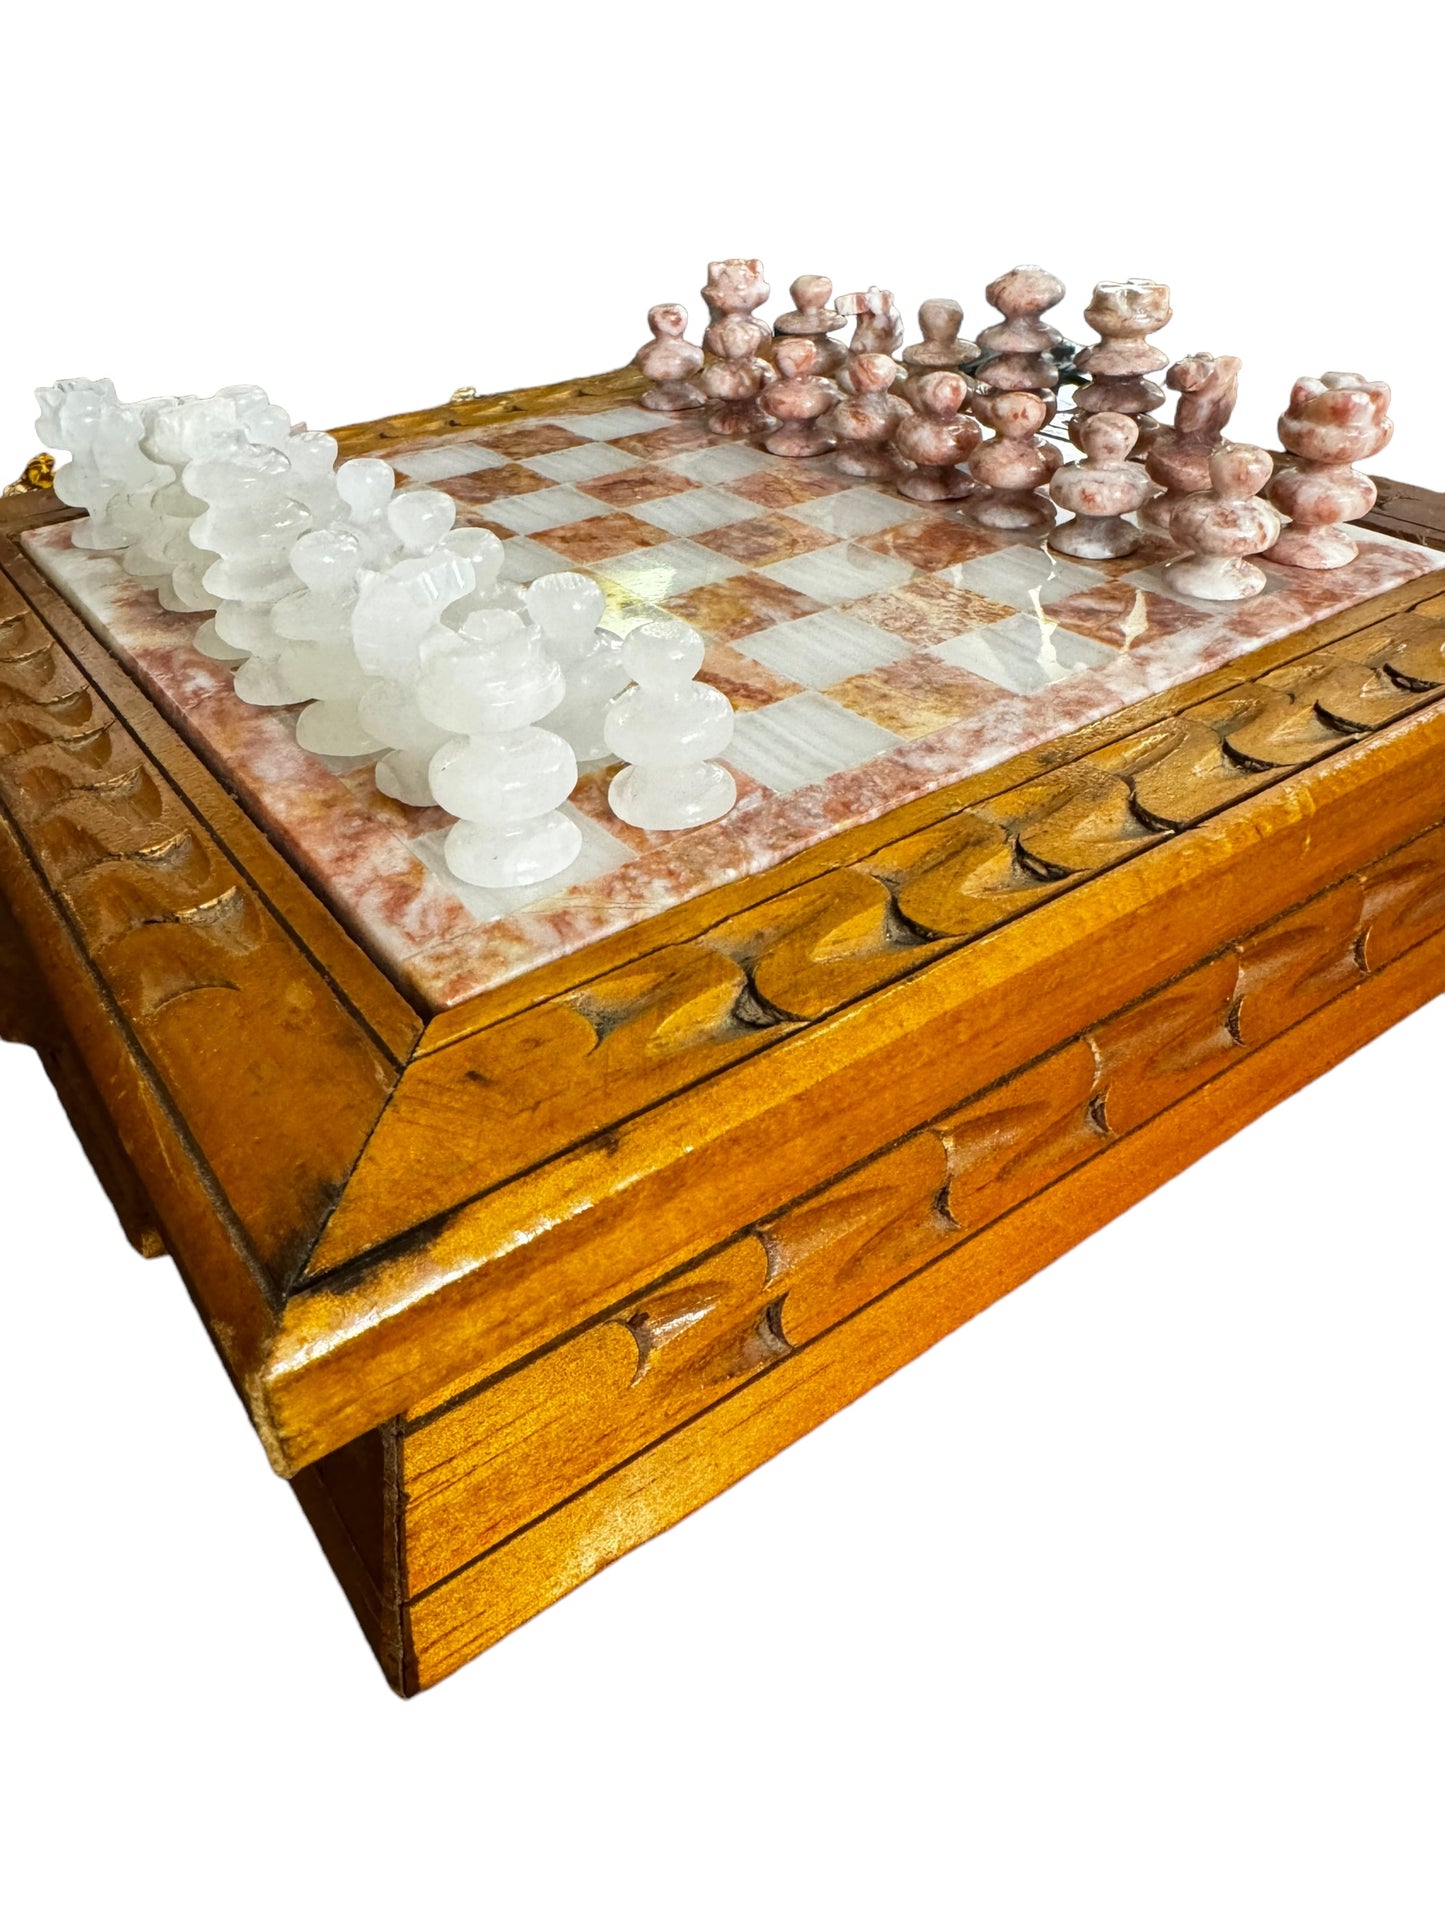 Vintage Marble And Wood Chess Set with Marble Carved Pieces -Complete-